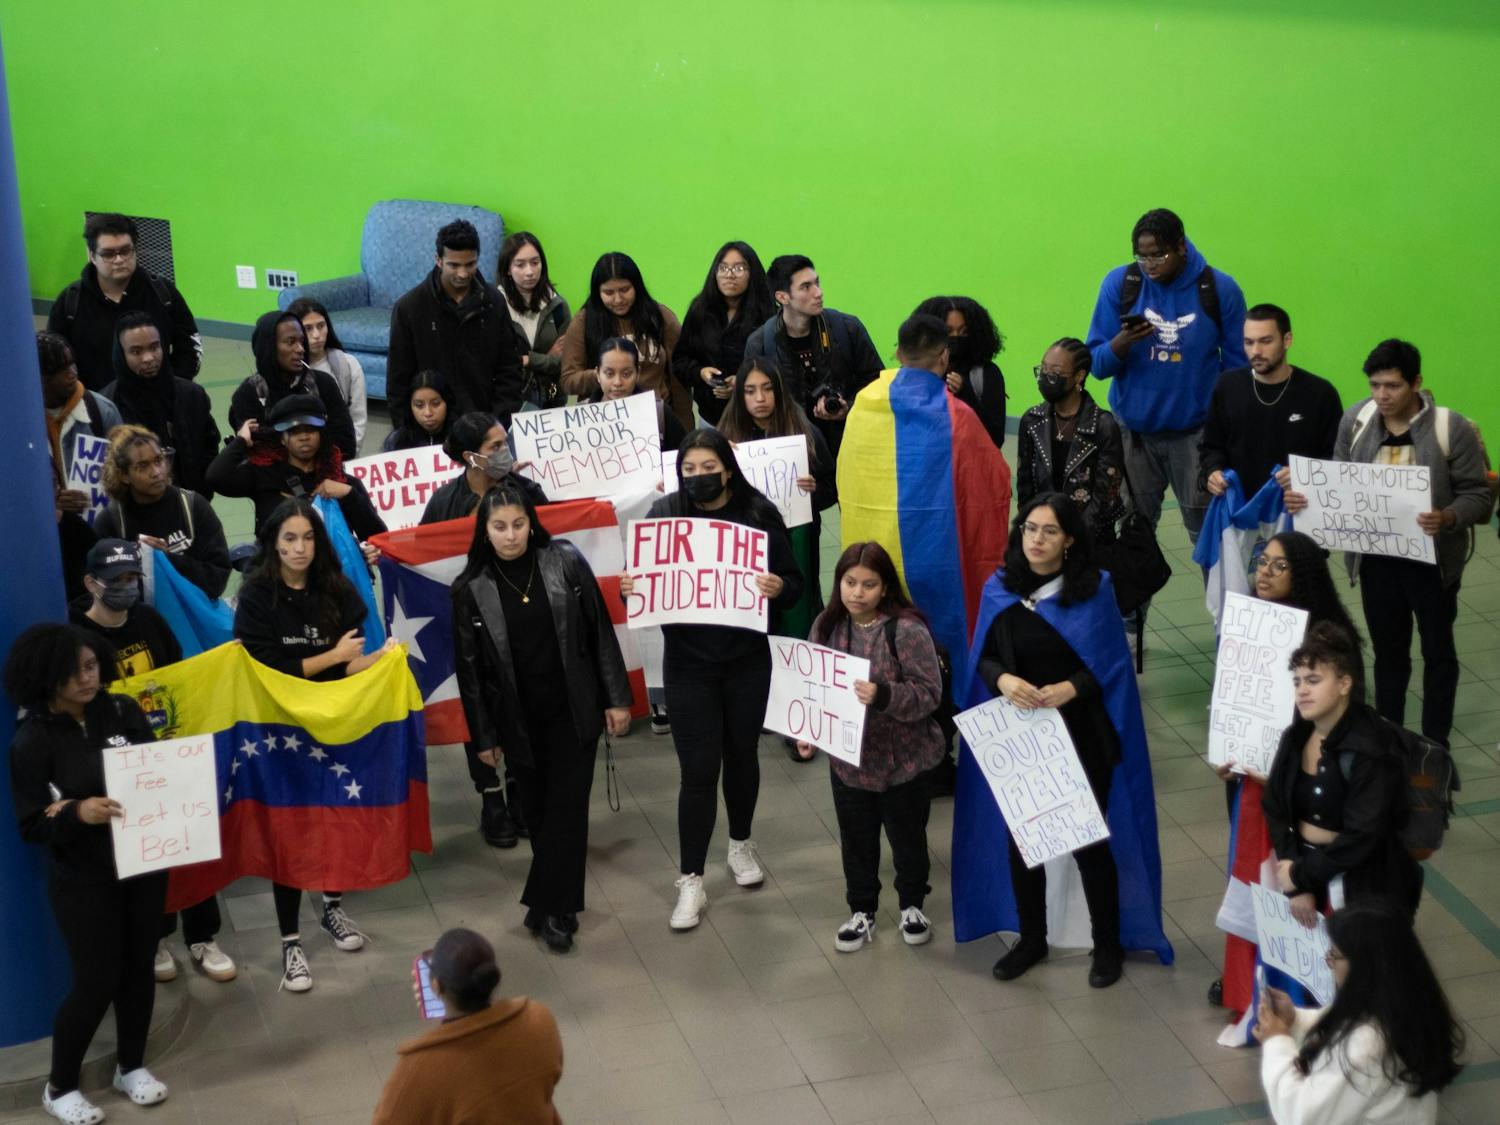 The Latin American Student Association organized a demonstration on Oct. 7 in protest of the SA's ticketing policy.